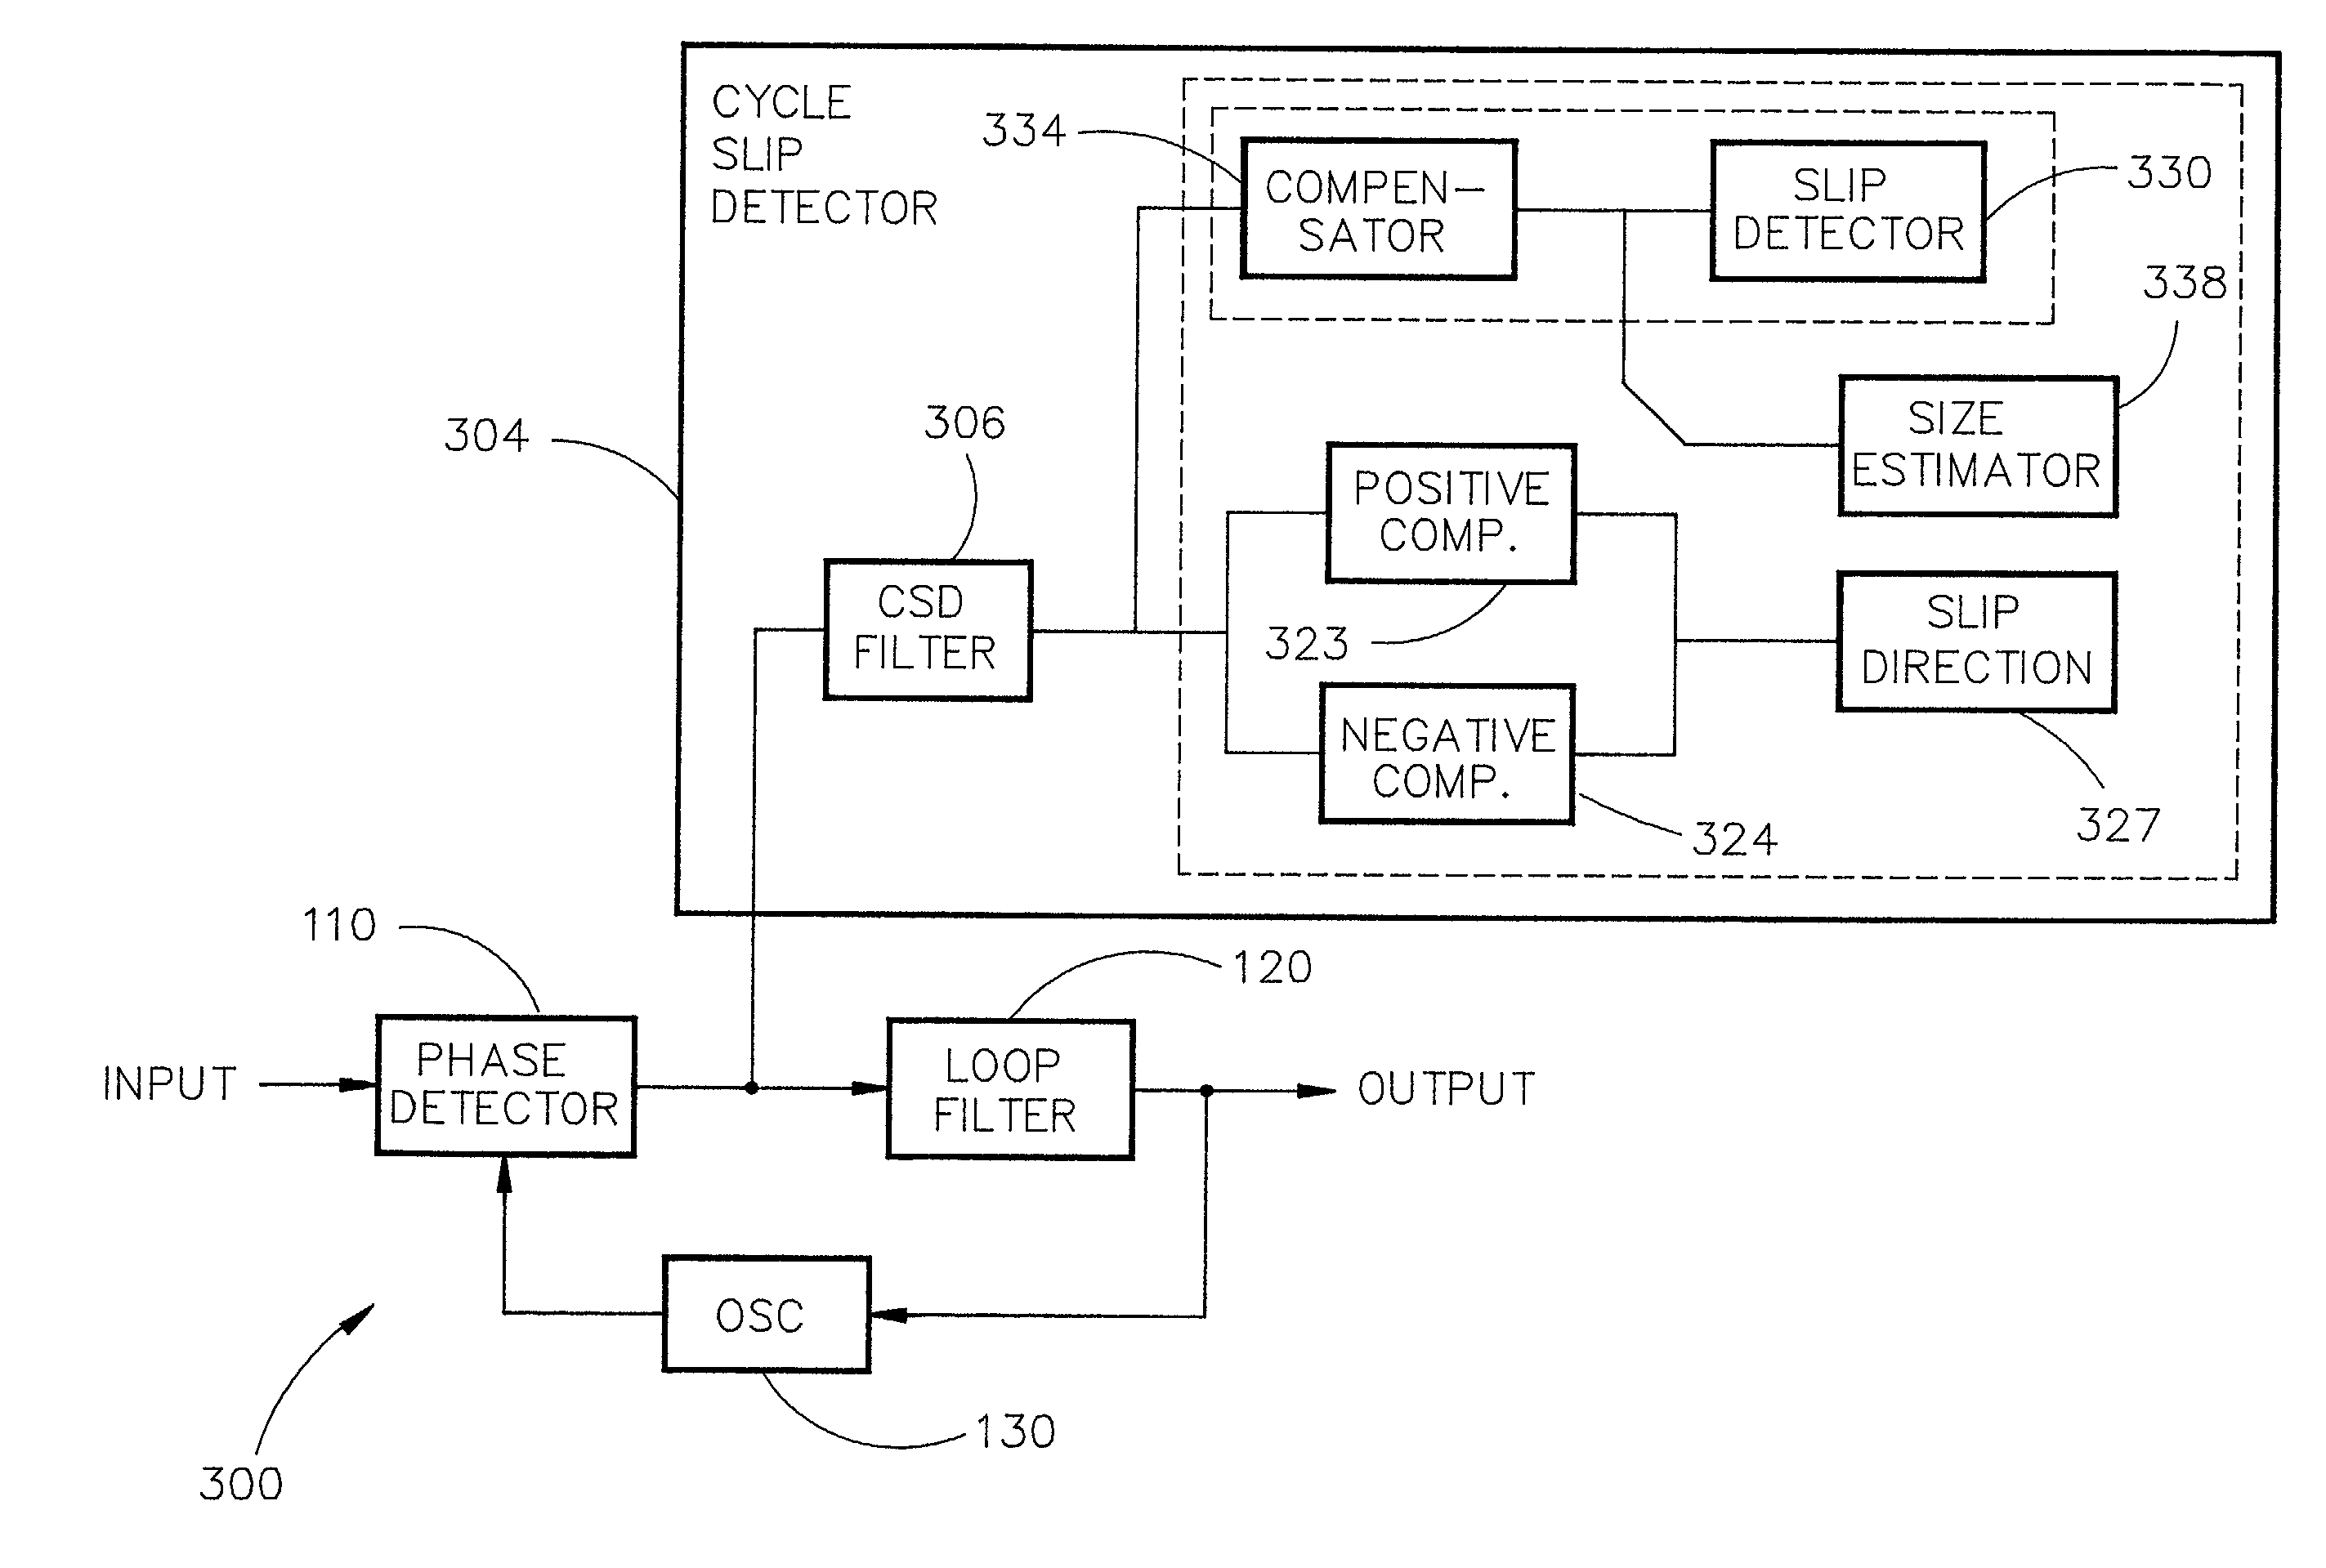 Cycle slip detection using low pass filtering